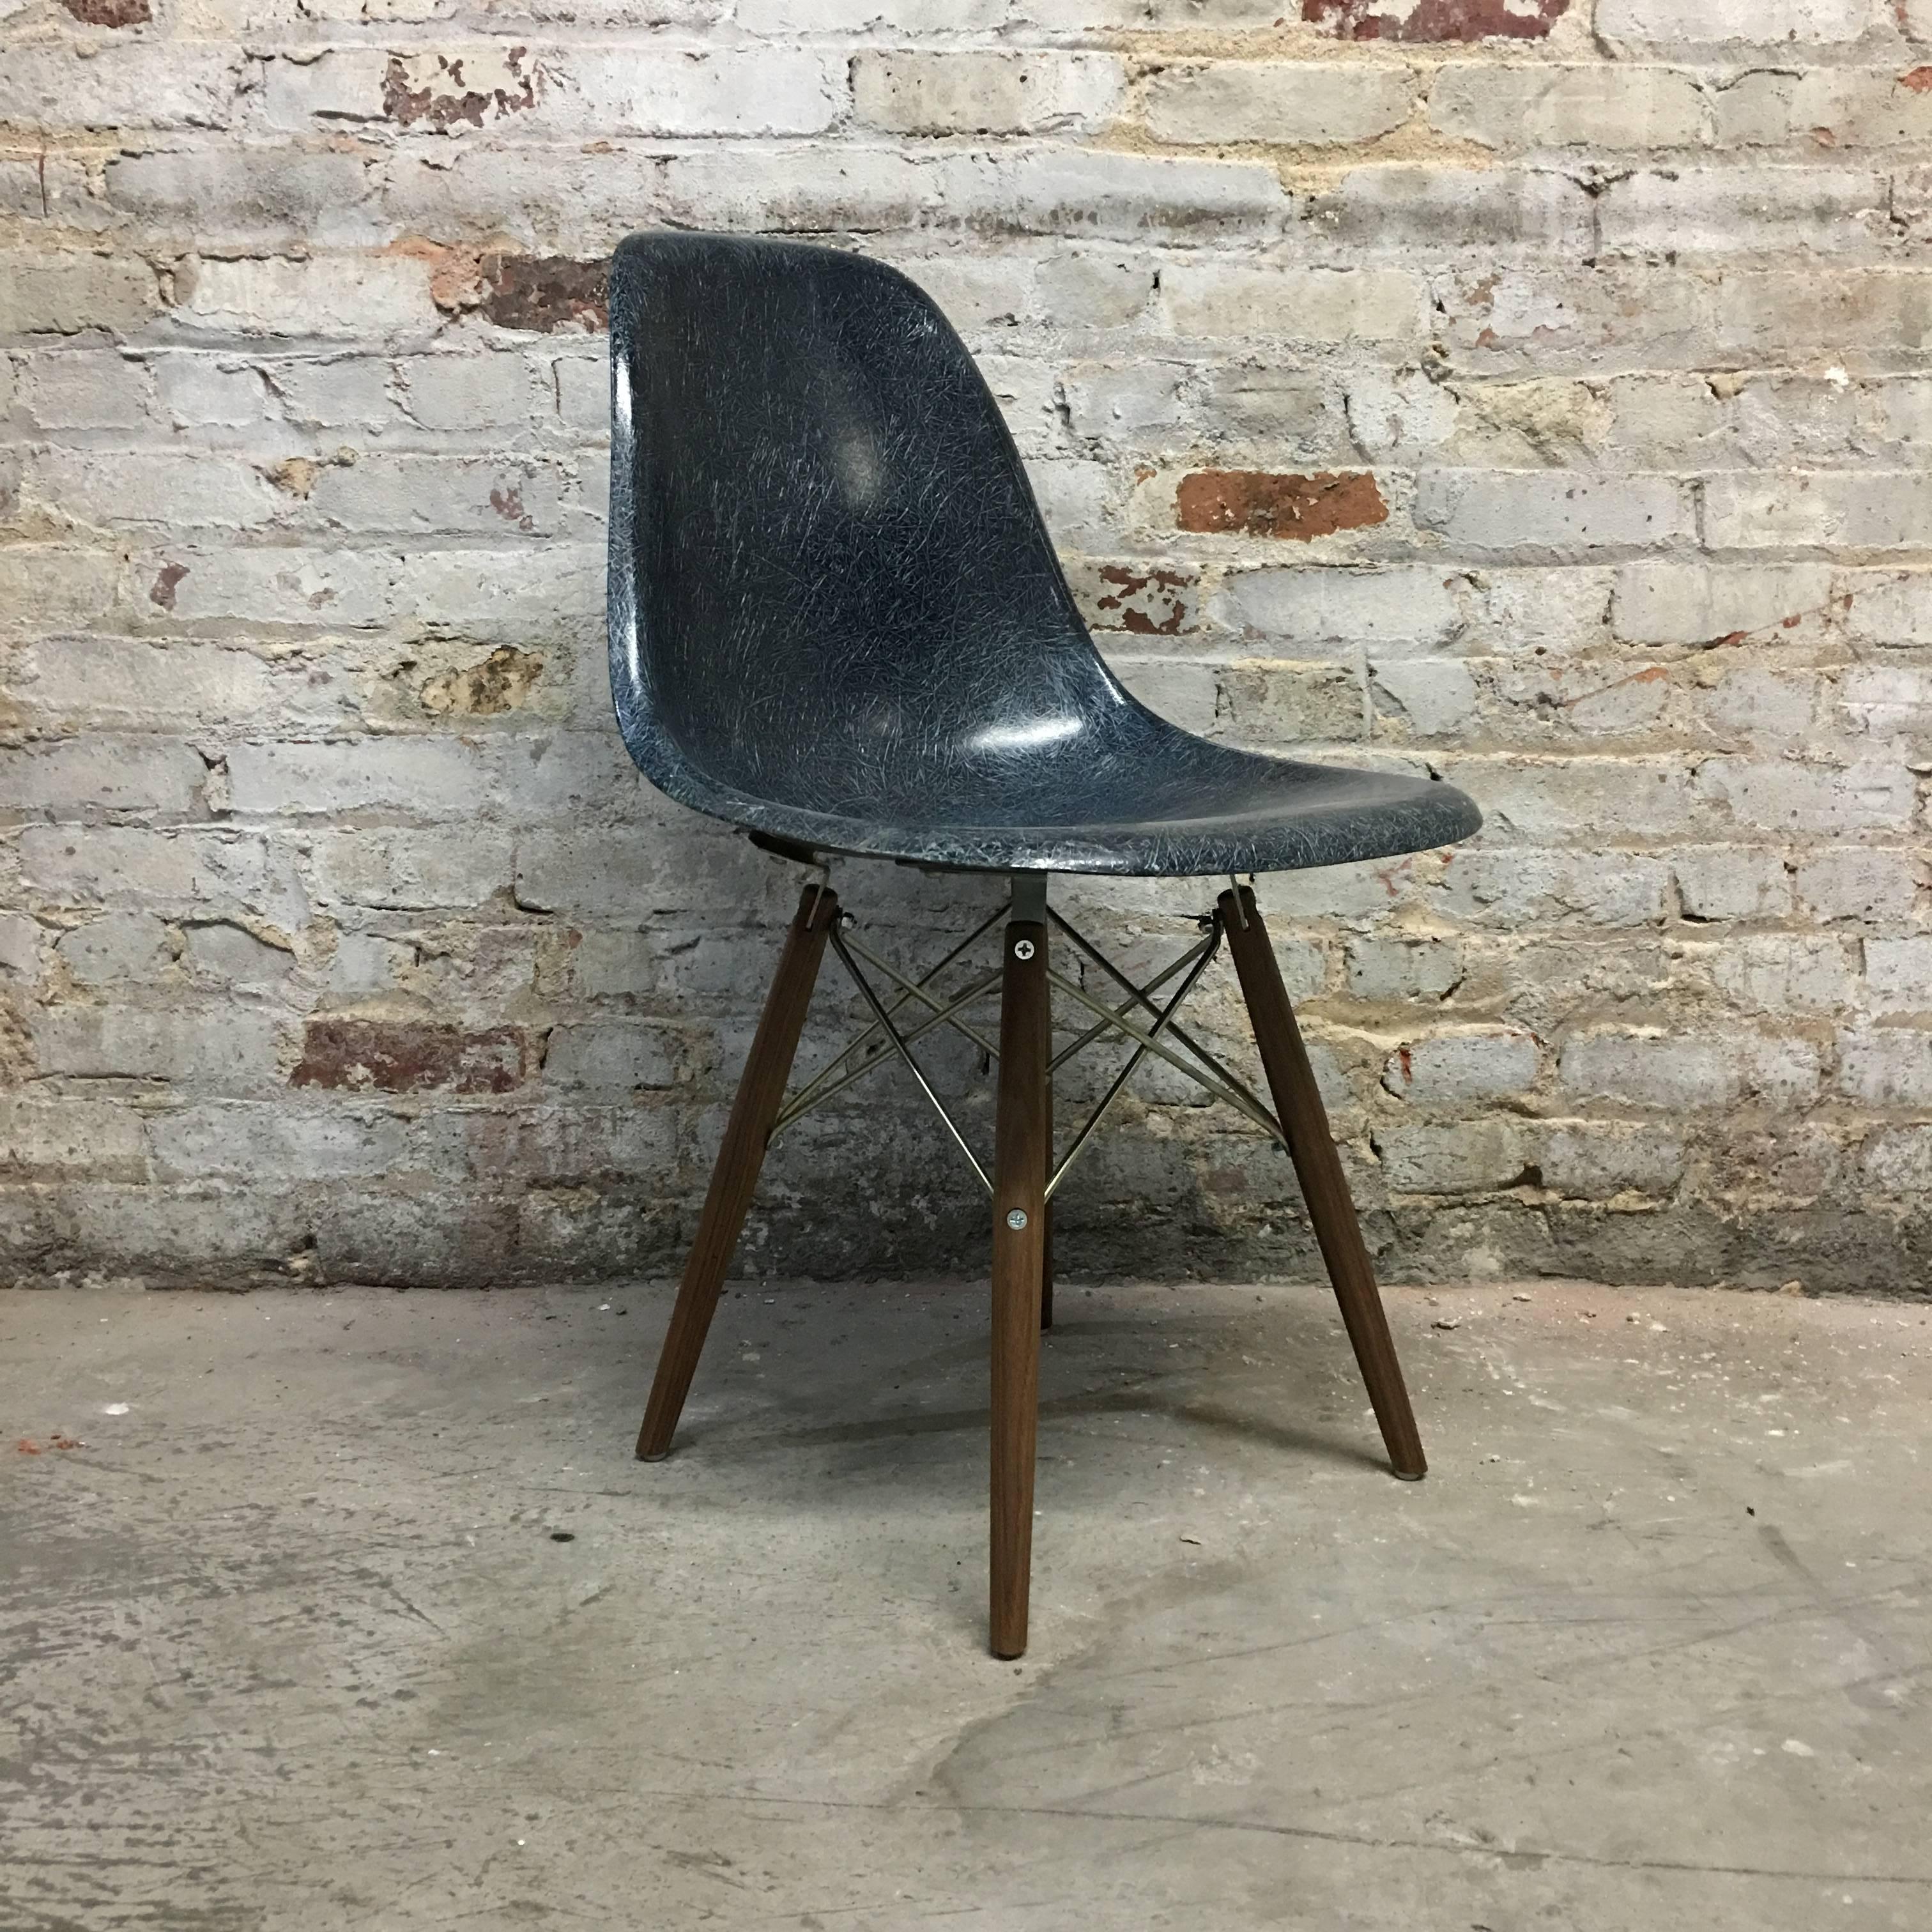 Set of eight Herman Miller Eames fiberglass dining chair in rare navy blue color. New doel bases in walnut (or maple or birch). Metal available in zinc (pictured) or black. Chairs boast wonderful fibers and deep color with no cracks or fading.